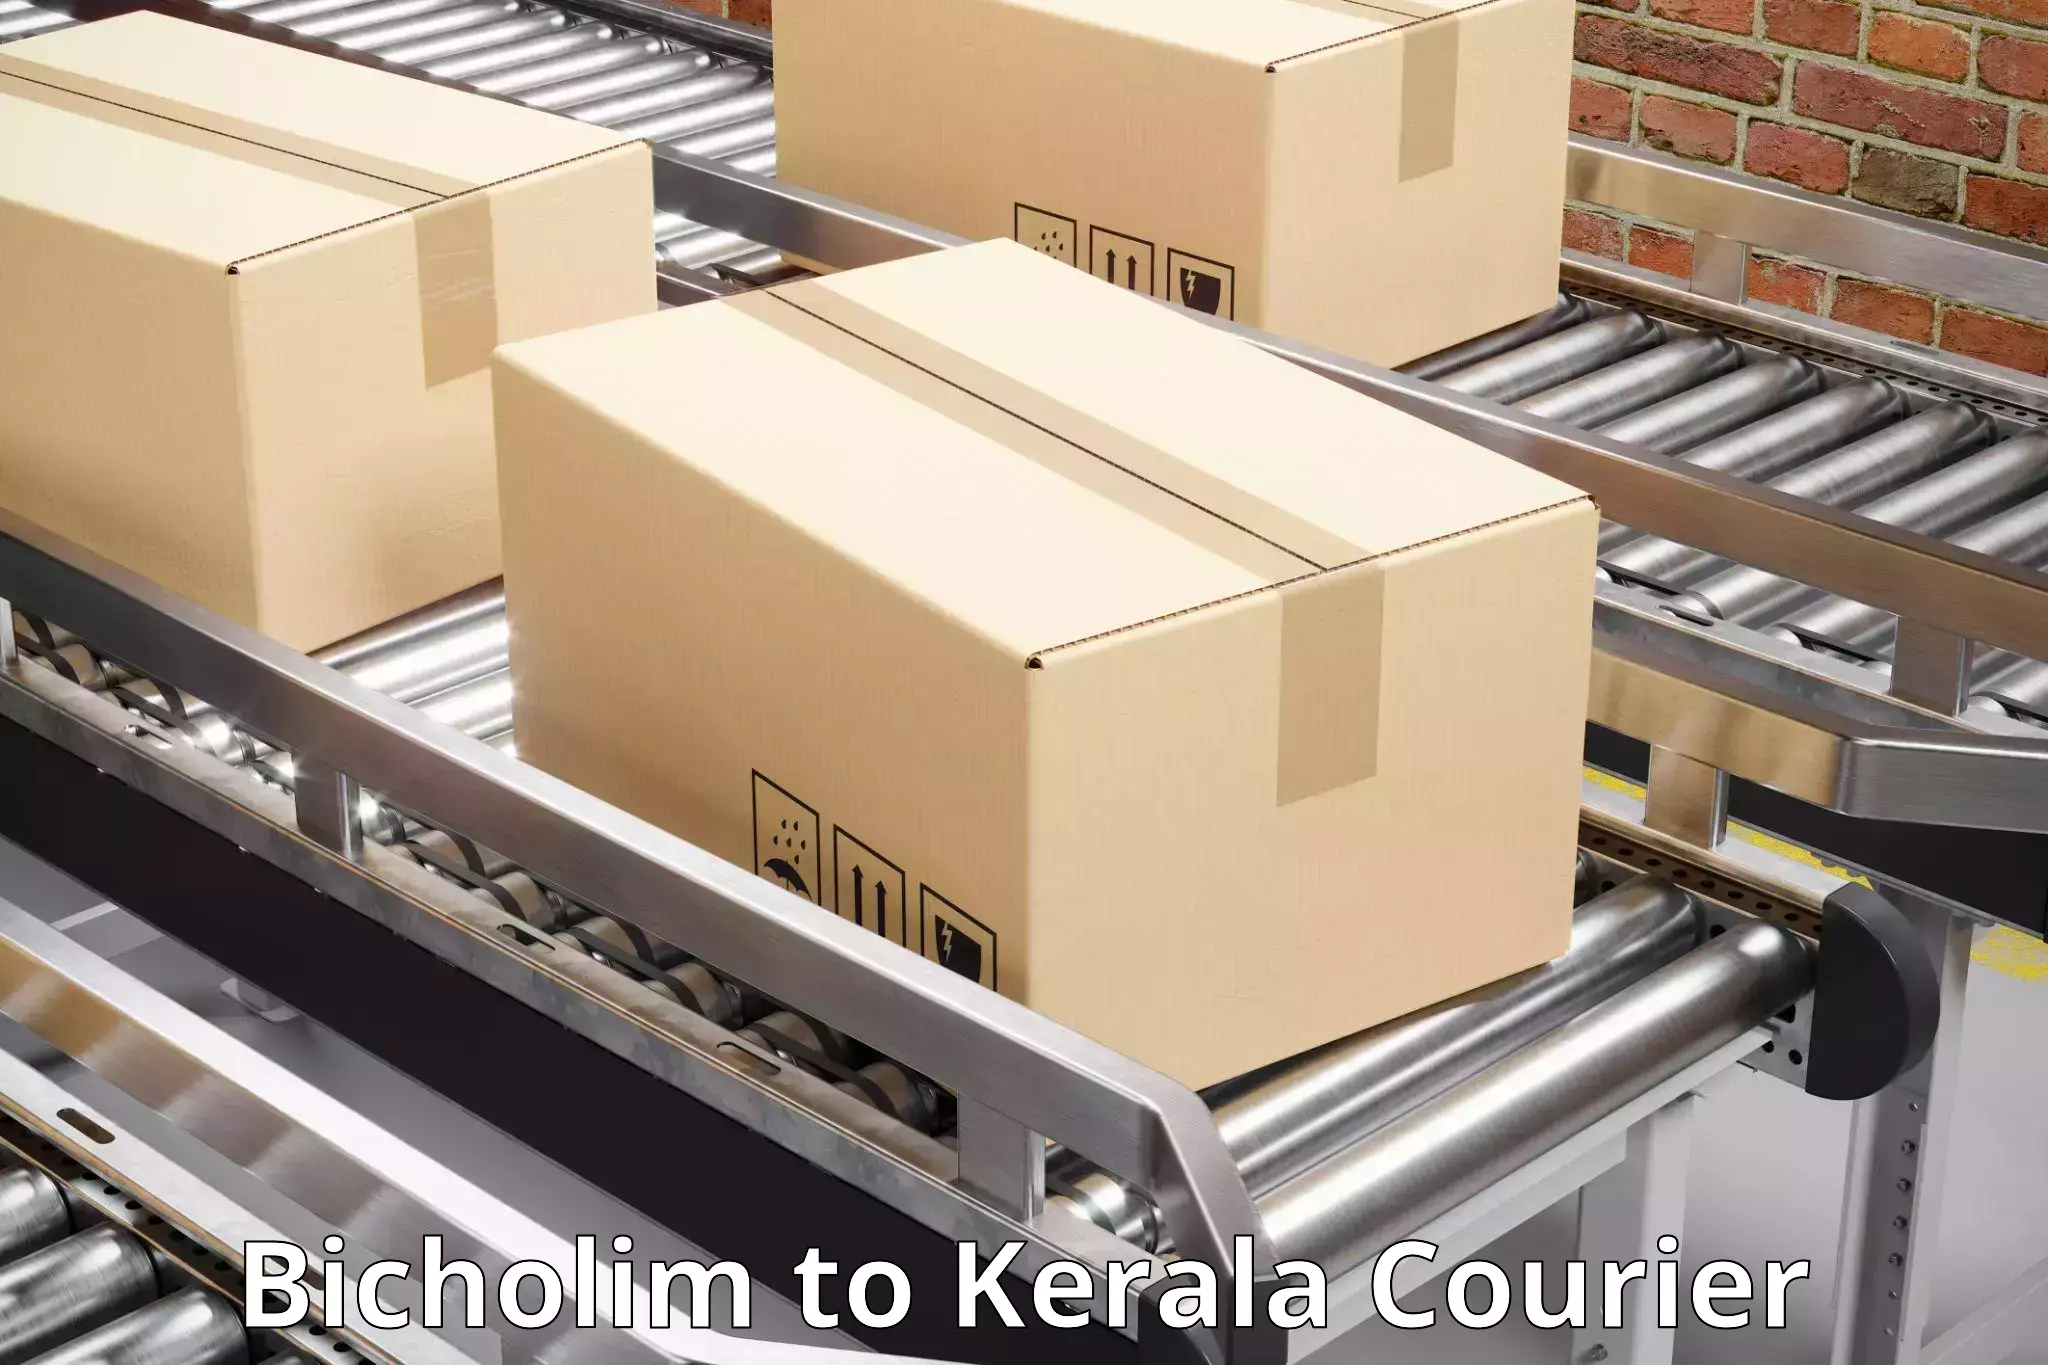 Multi-national courier services Bicholim to Puthukkad